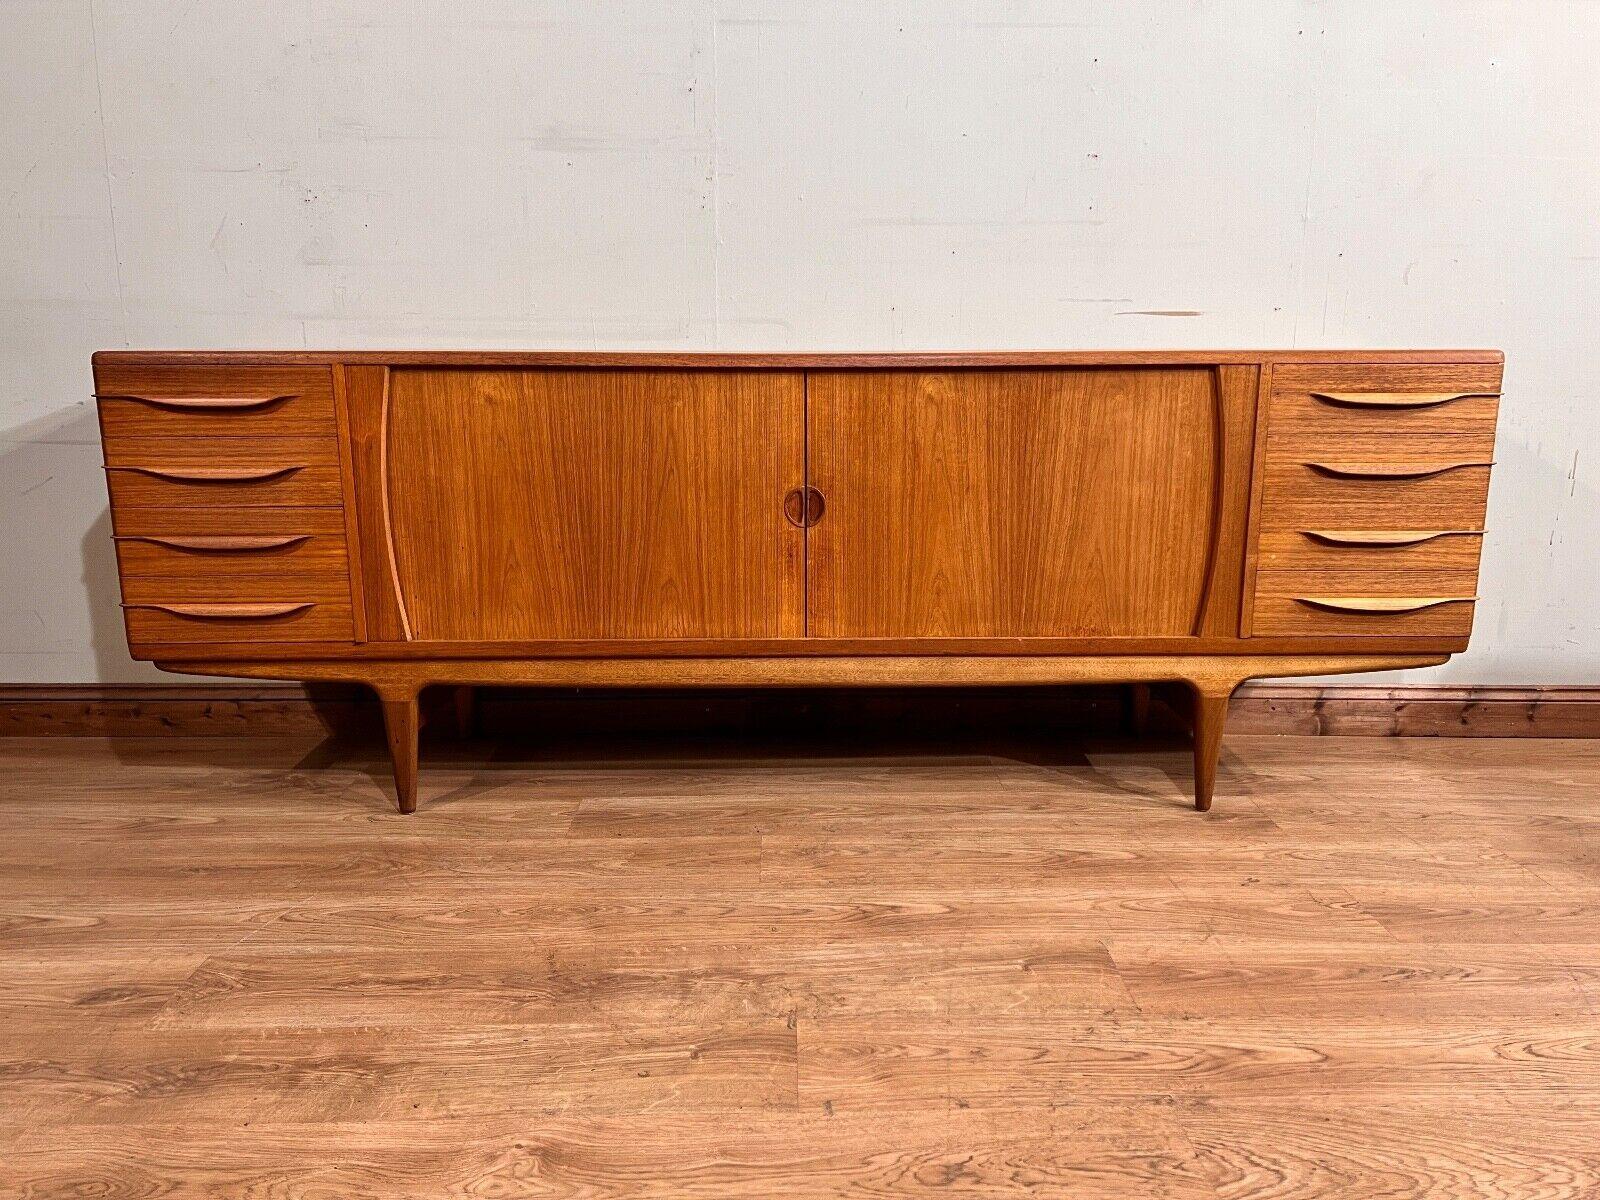 Rare and large Mid Century Danish sideboard
Circa 1960s on this piece by Johannes Anderson
Clean and minimal design perfect for modern interiors
Hand crafted from teak
Johannes Anderson's Scandinavian style was well known for distinctive shaping,